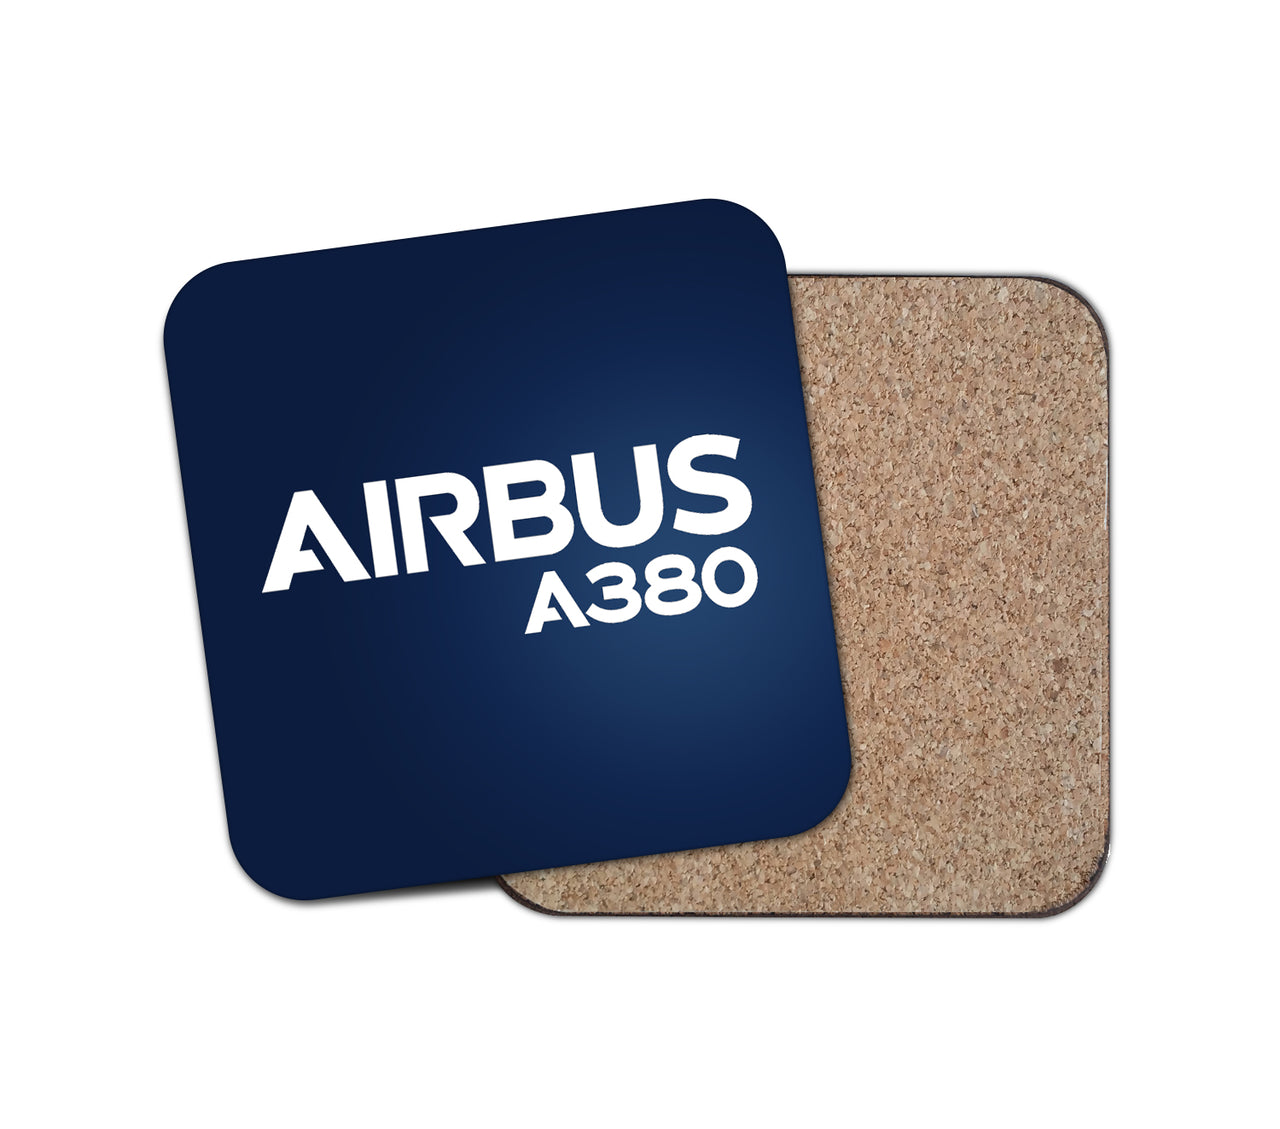 Airbus A380 & Text Designed Coasters